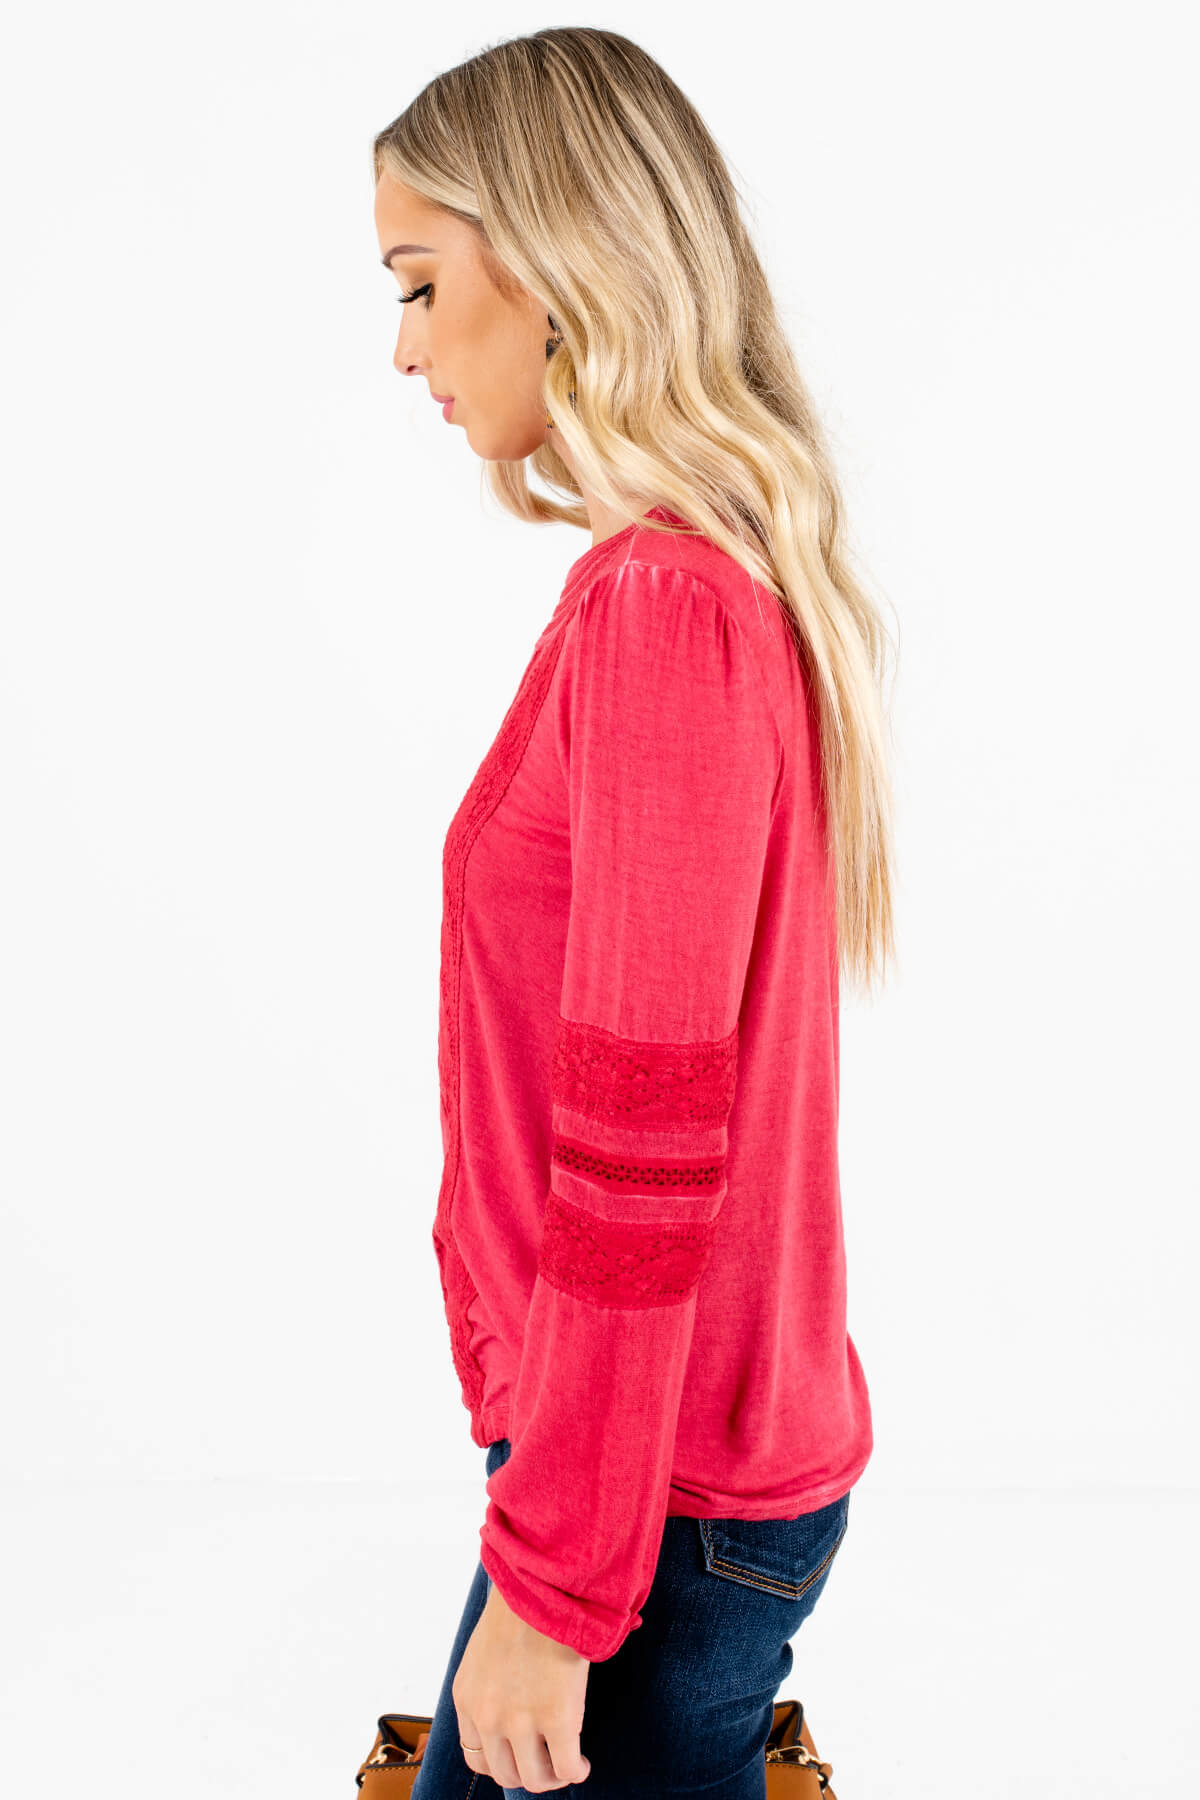 Red High-Quality Stretchy Material Boutique Tops for Women